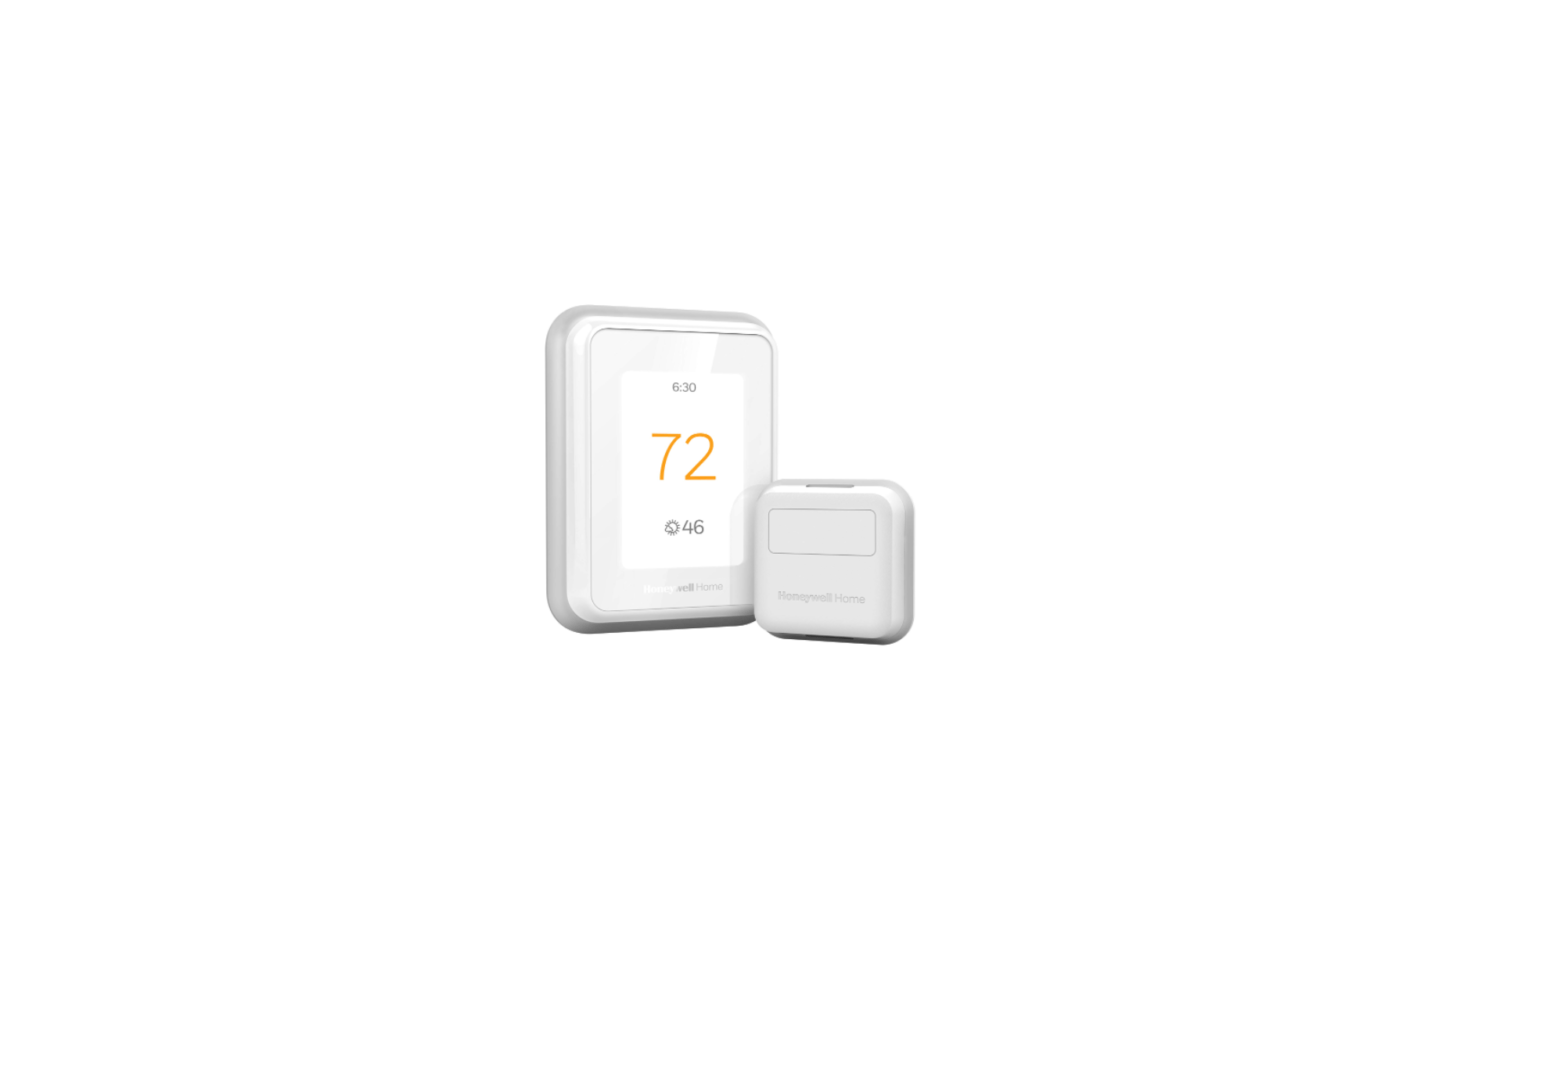 Honeywell Home T9 SMART THERMOSTAT WITH SENSOR User Manual - Featured image